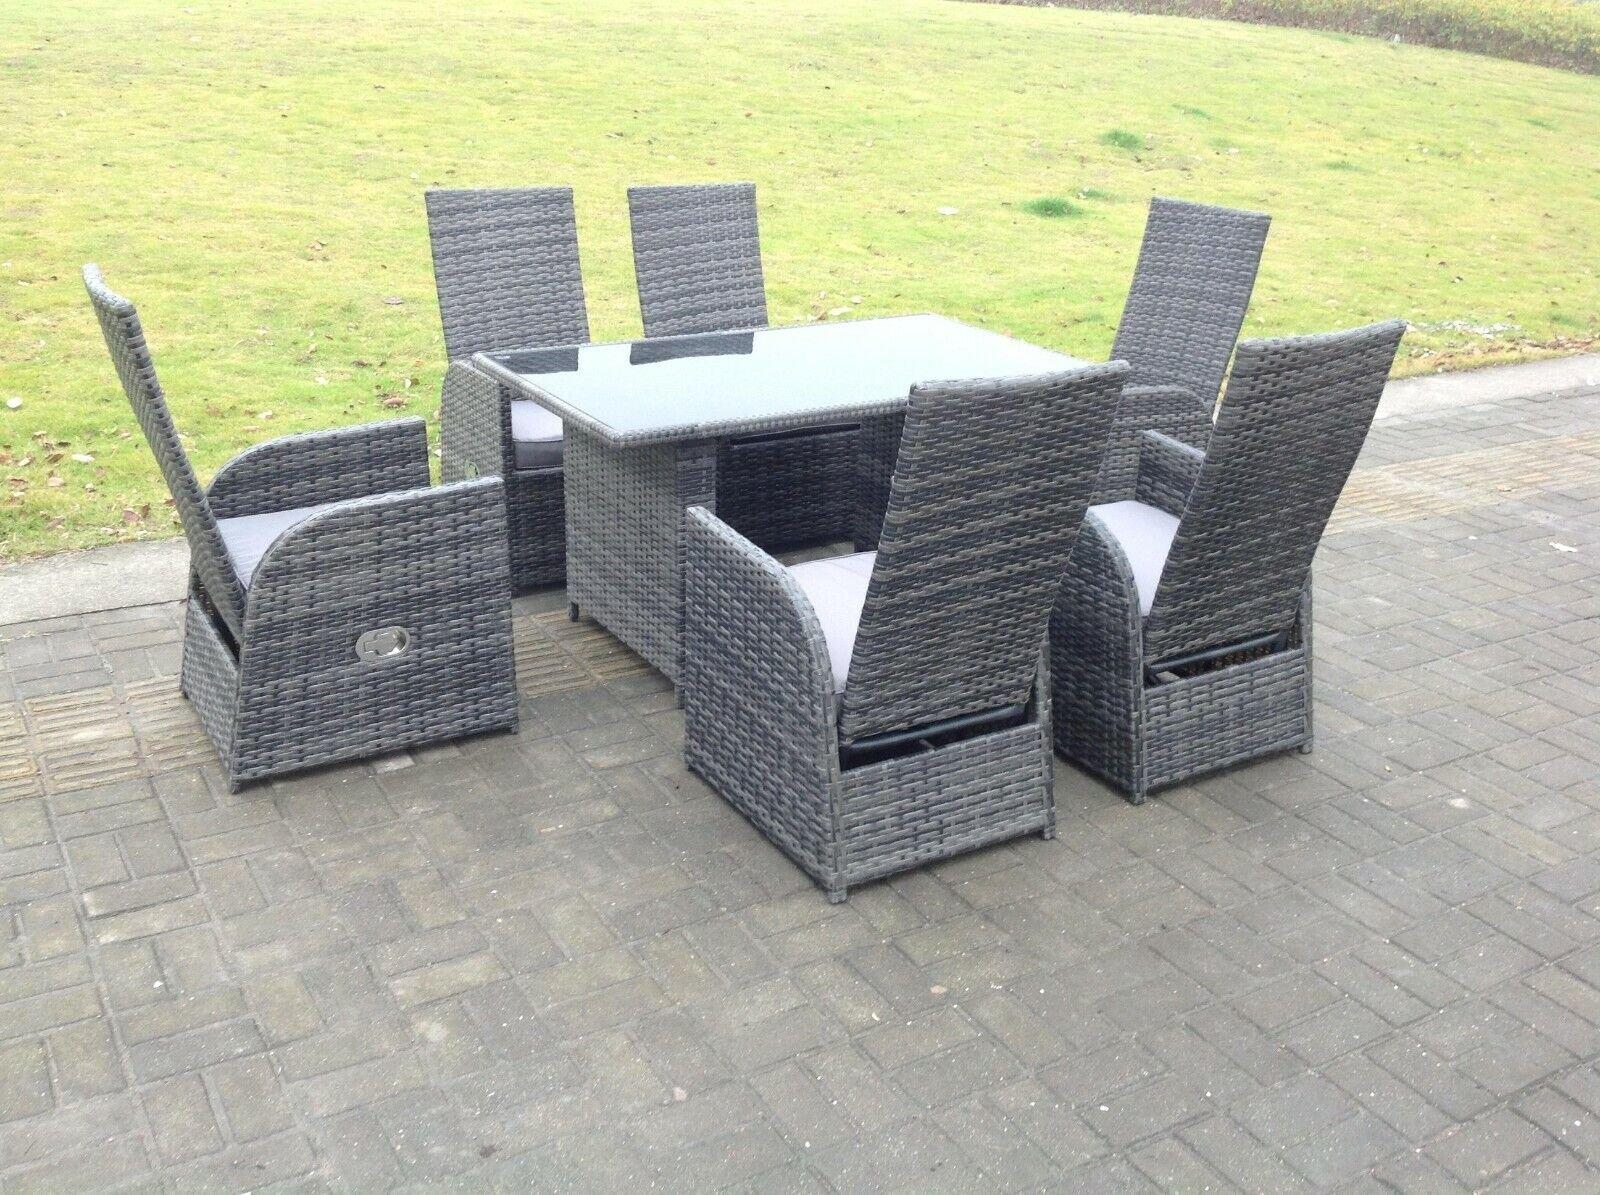 Outdoor Wicker Rattan Garden Furniture Reclining Chair And Table Dining Sets 6 Seater Rectangular Ta